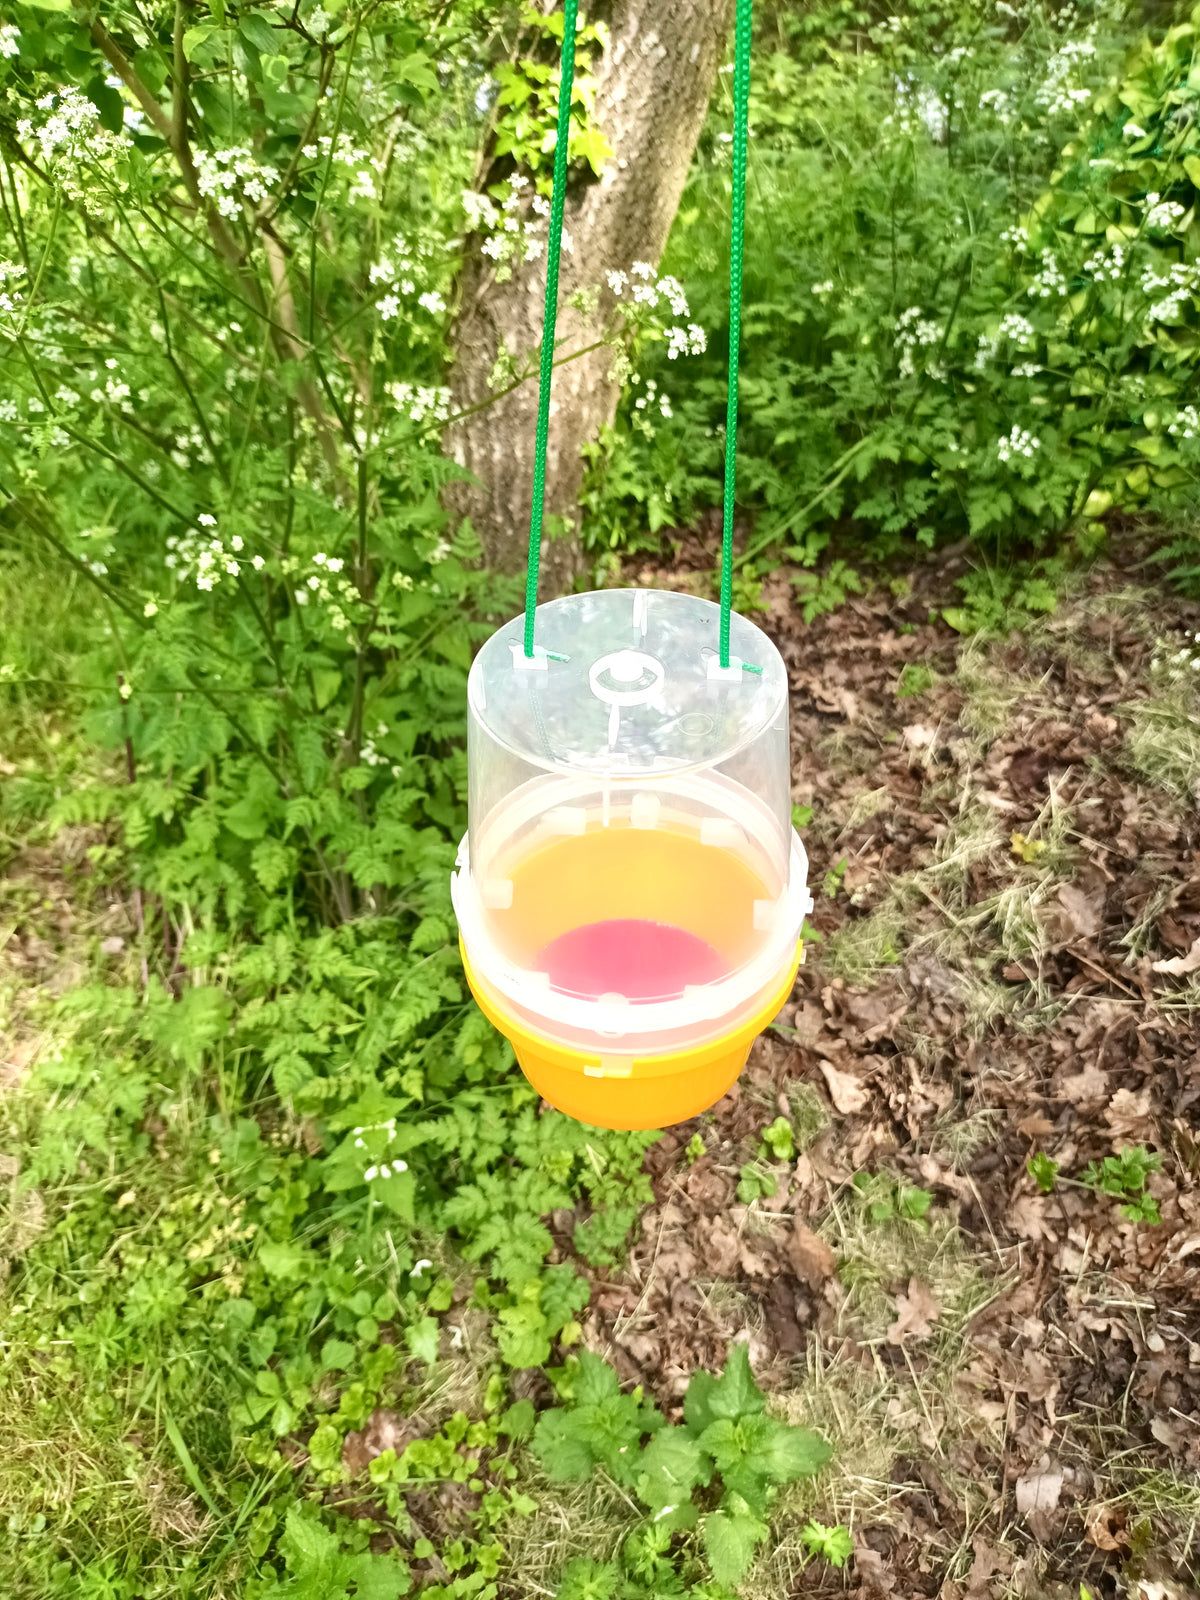 Wasp Trap With Attractant